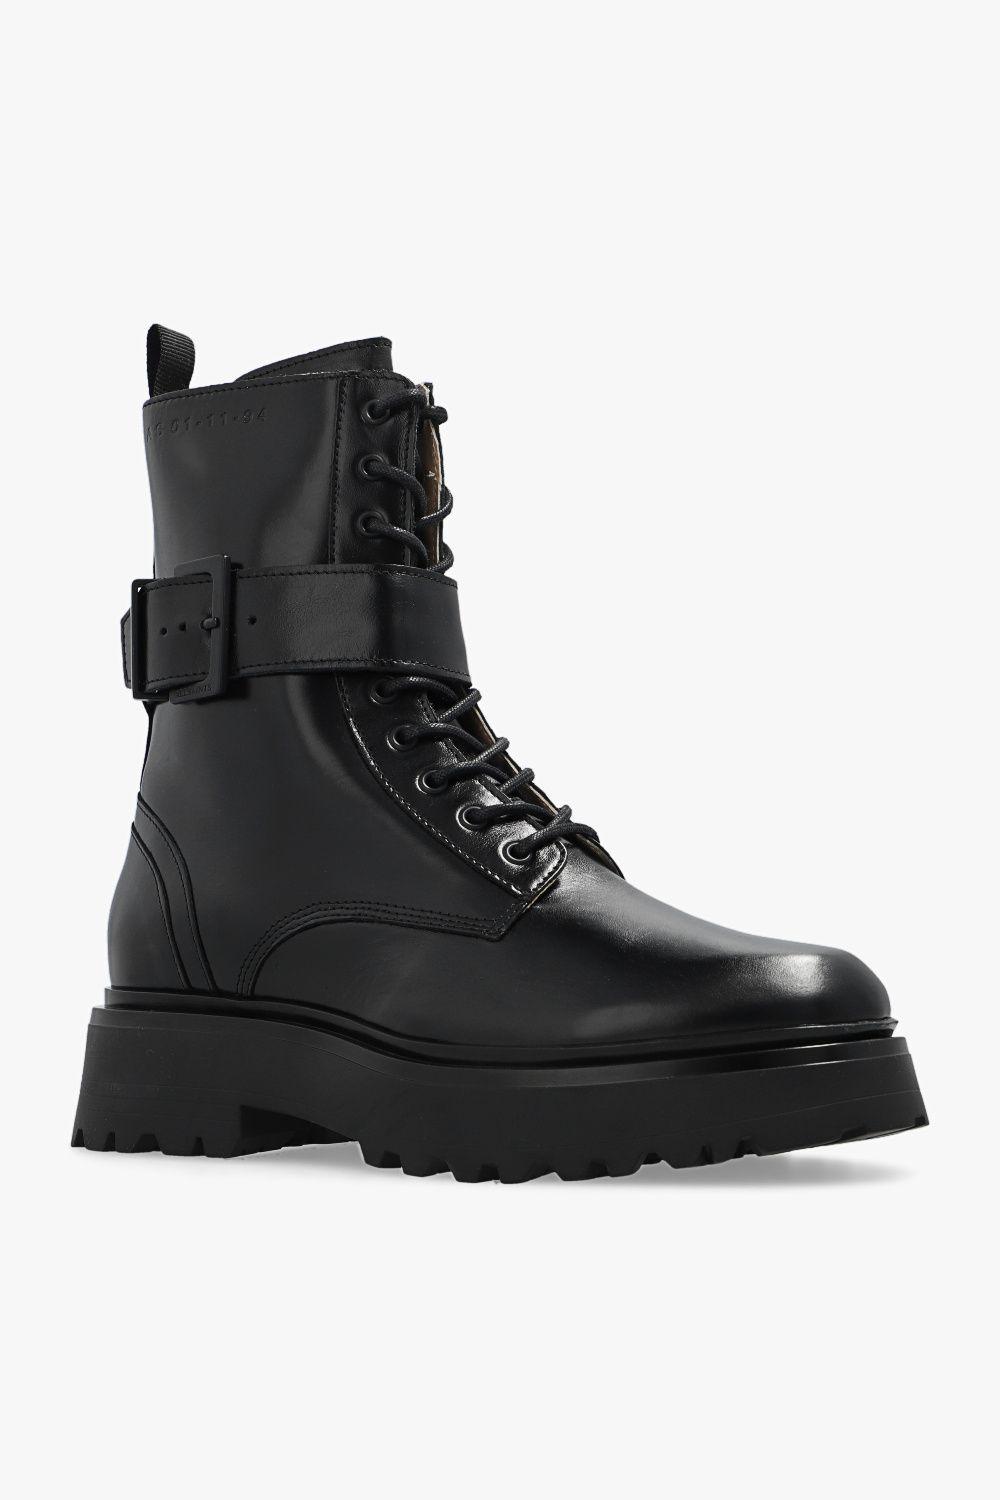 AllSaints 'onyx' Ankle Boots in Black | Lyst